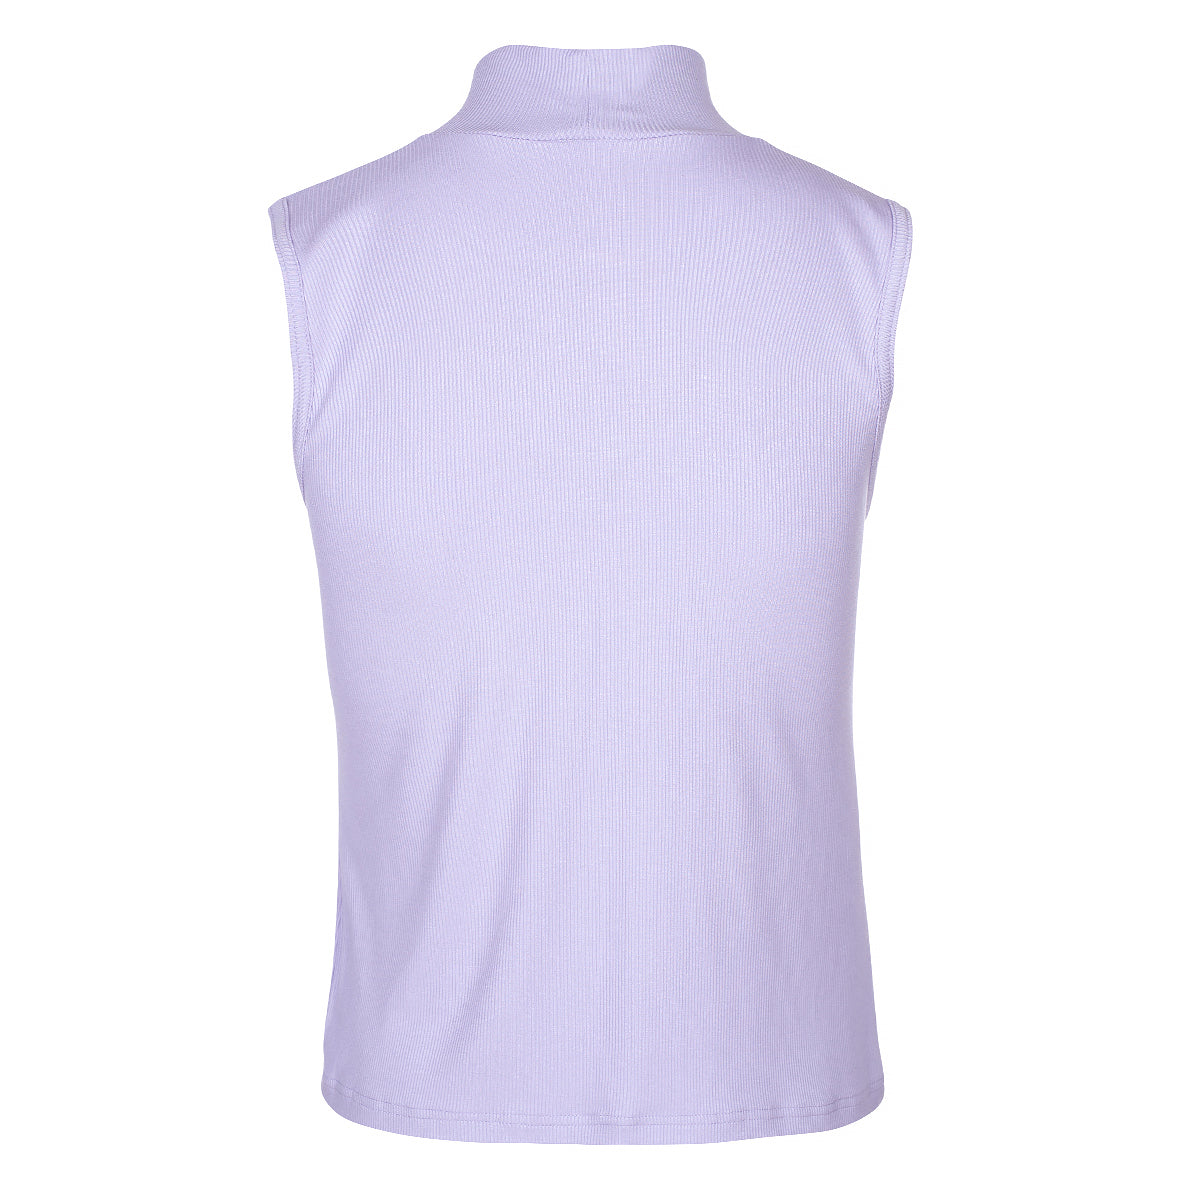 LUXZUZ // ONE TWO Bia Top Top 407 Lilacs Bloom